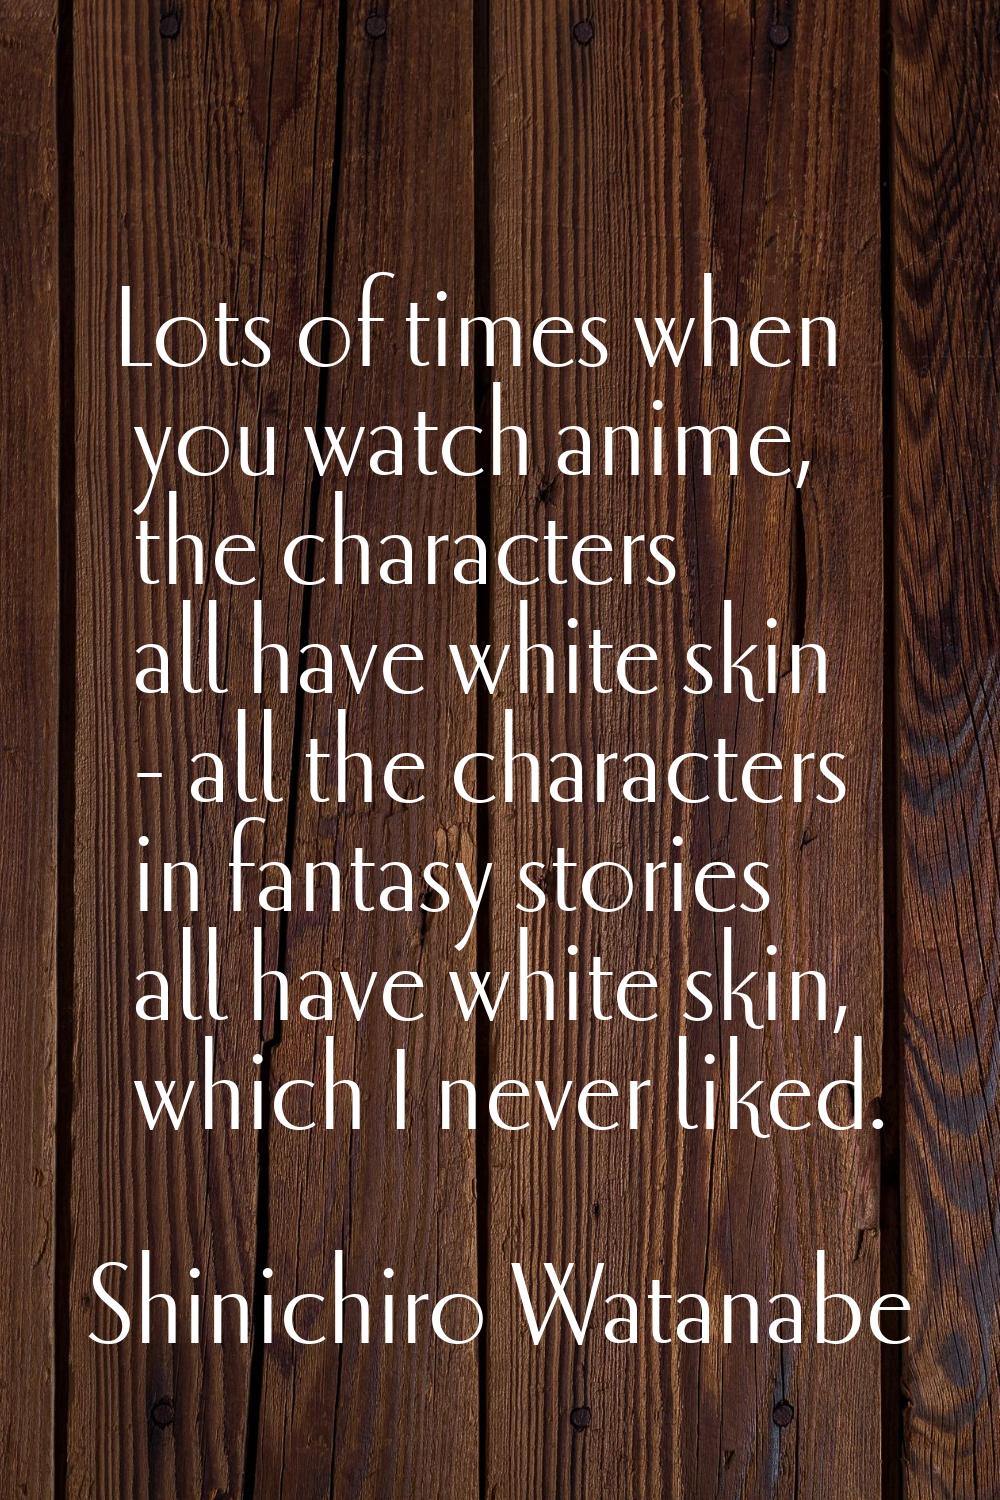 Lots of times when you watch anime, the characters all have white skin - all the characters in fant